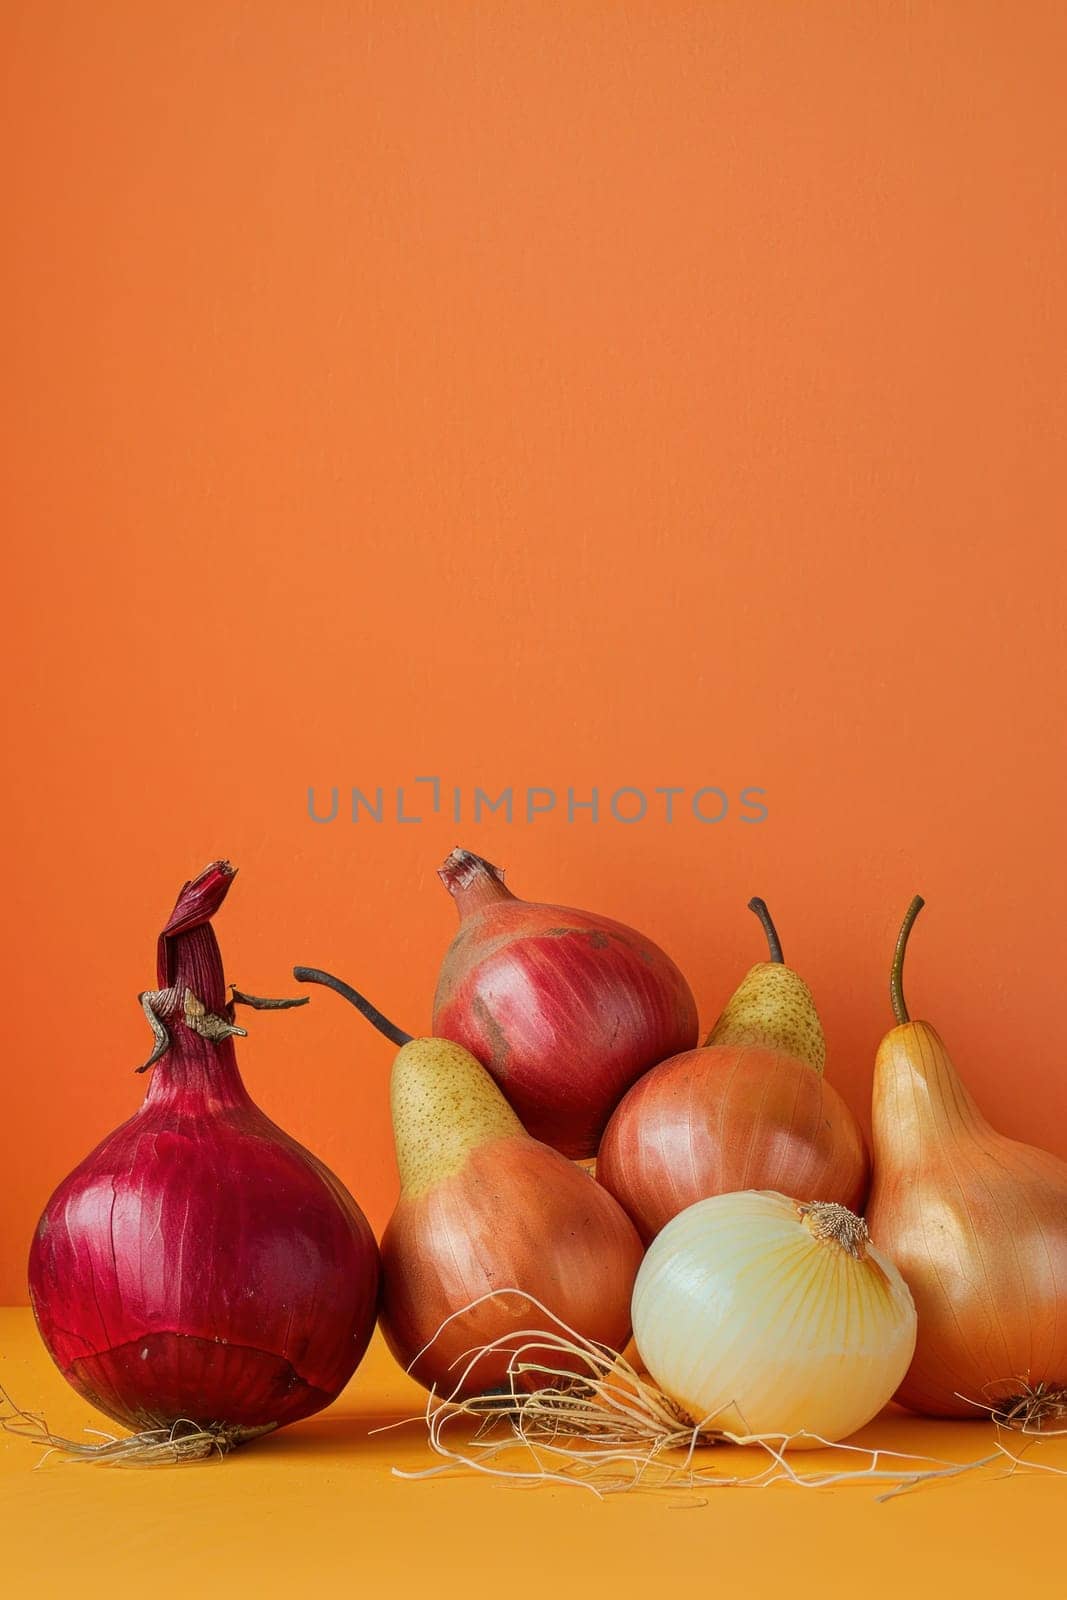 Fresh harvest of onions and pears on vibrant orange background with textural orange wall in background